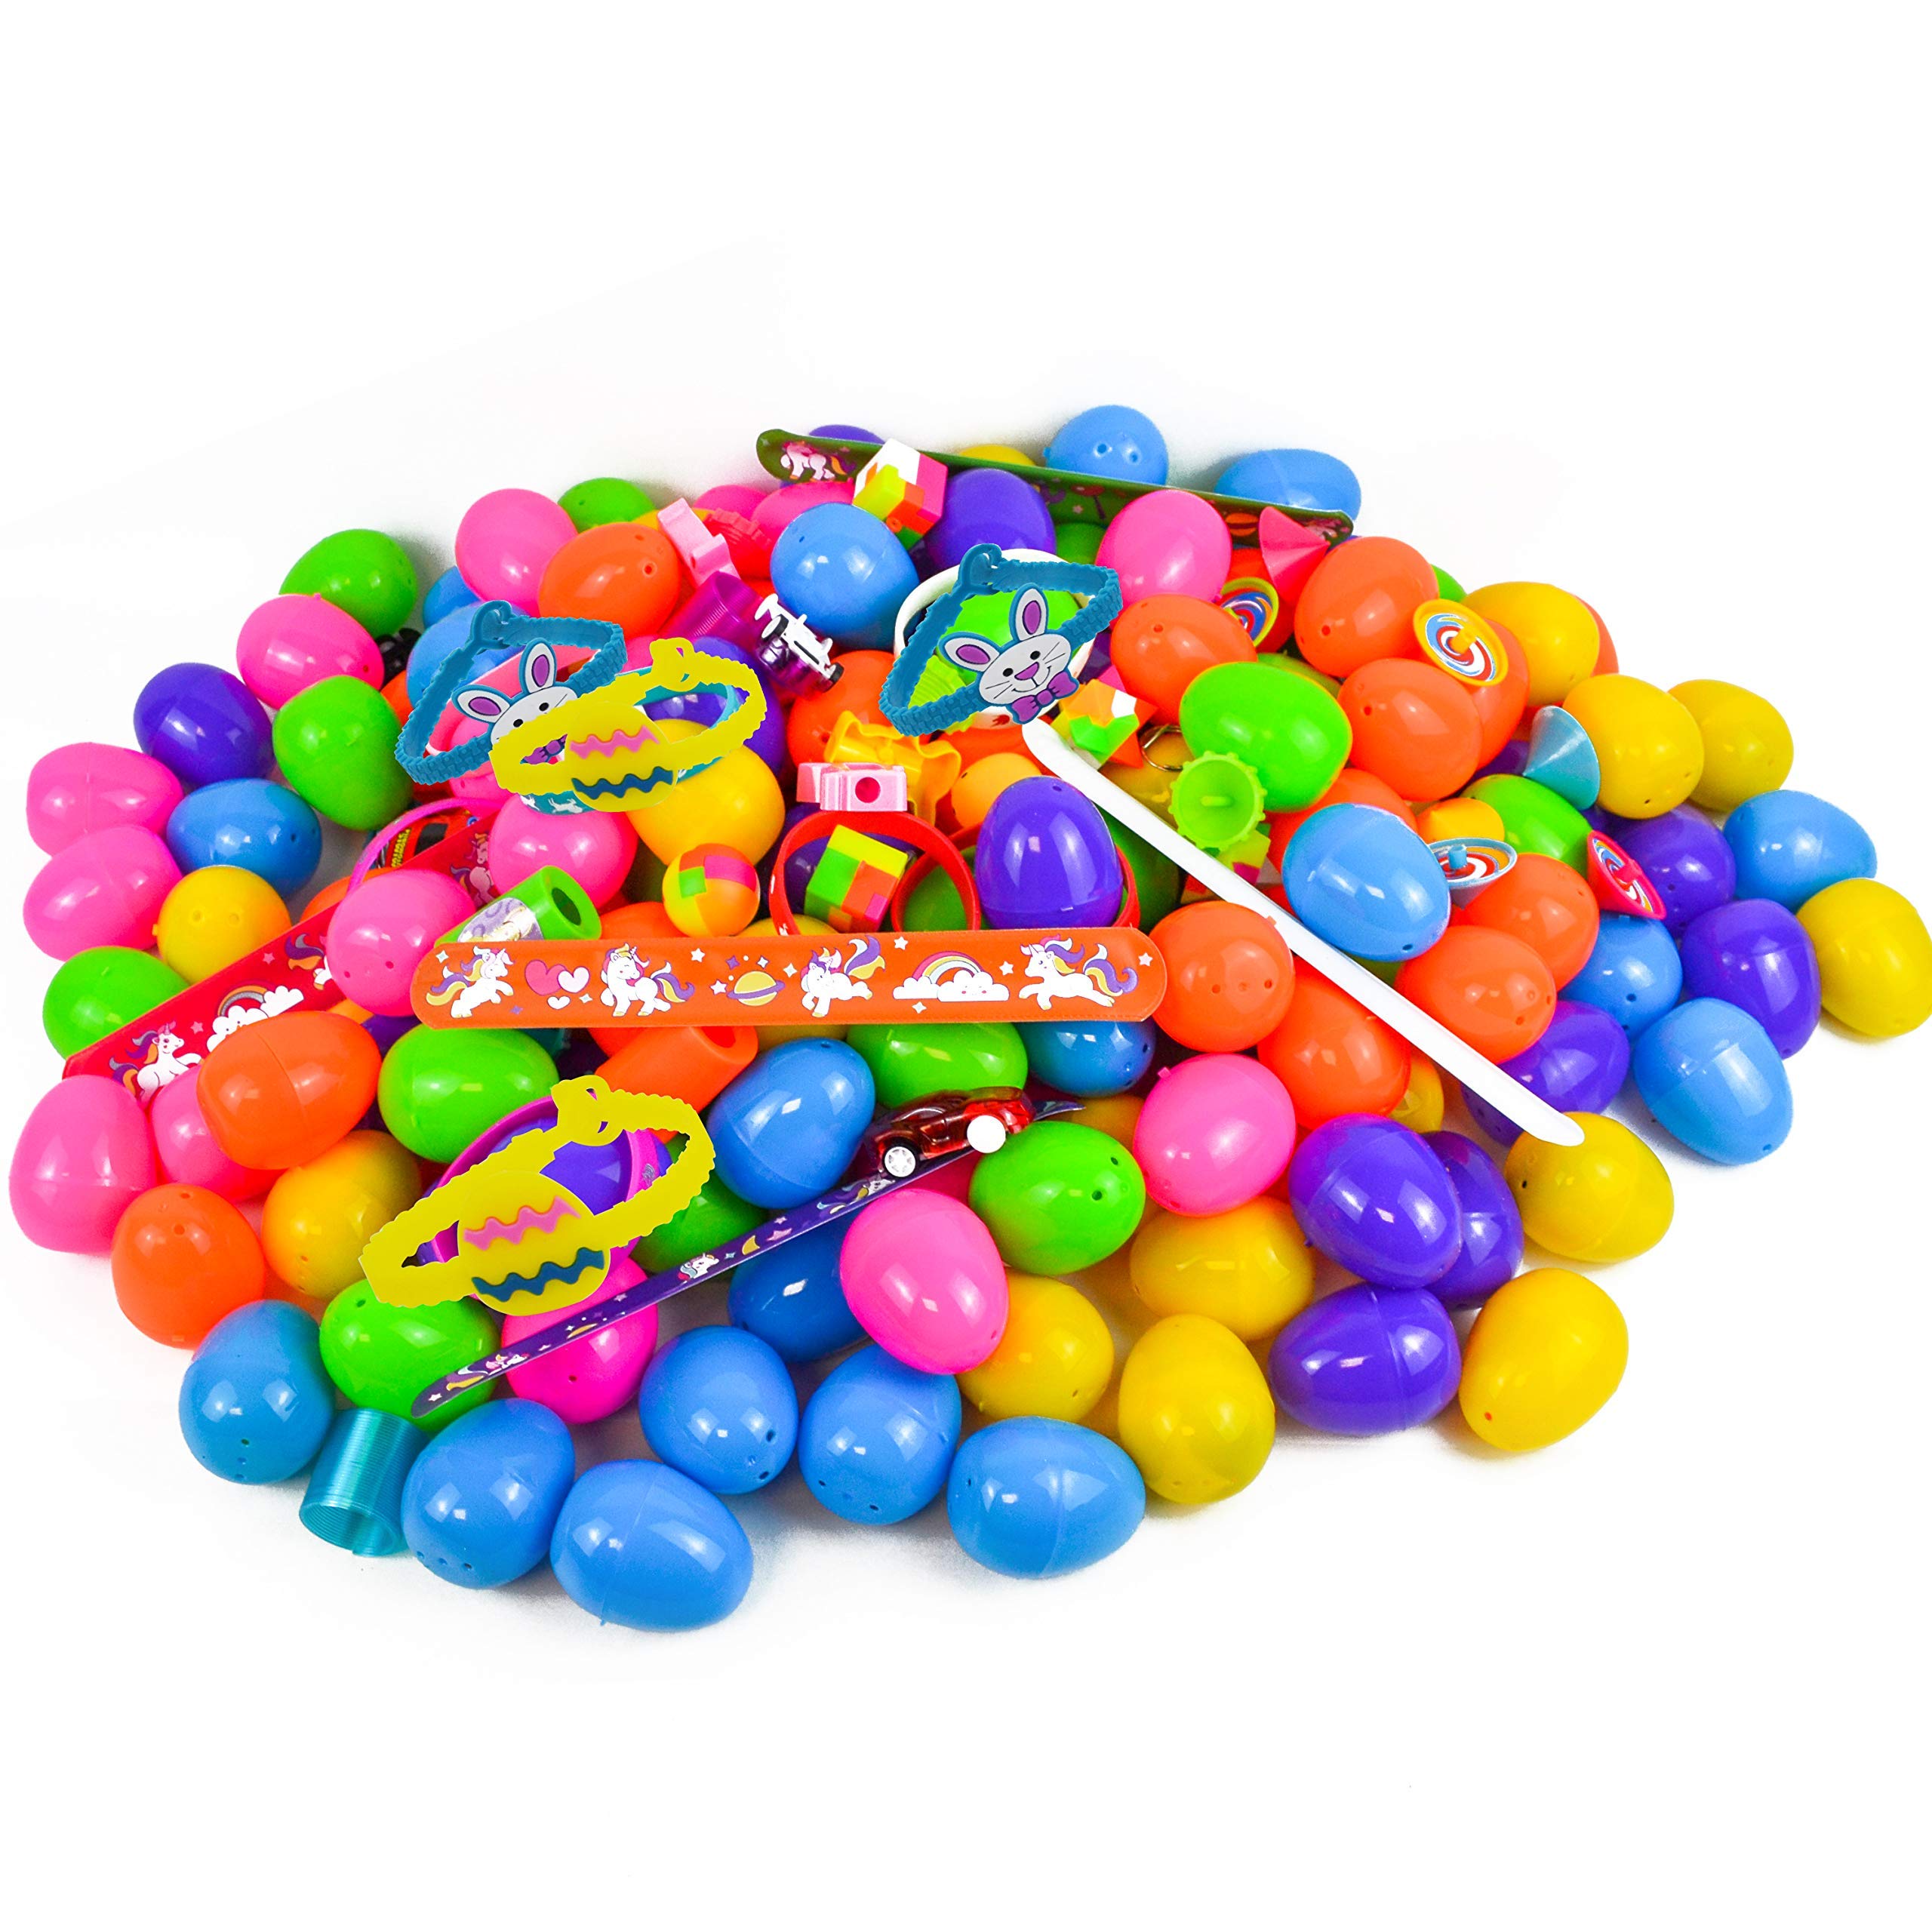 JOYIN 200 PCS Easter Prefilled Eggs with Assorted Toys for Easter Basket Stuffers, Easter Egg Hunt Supplies, Easter Classroom Prizes, Easter Party Favor